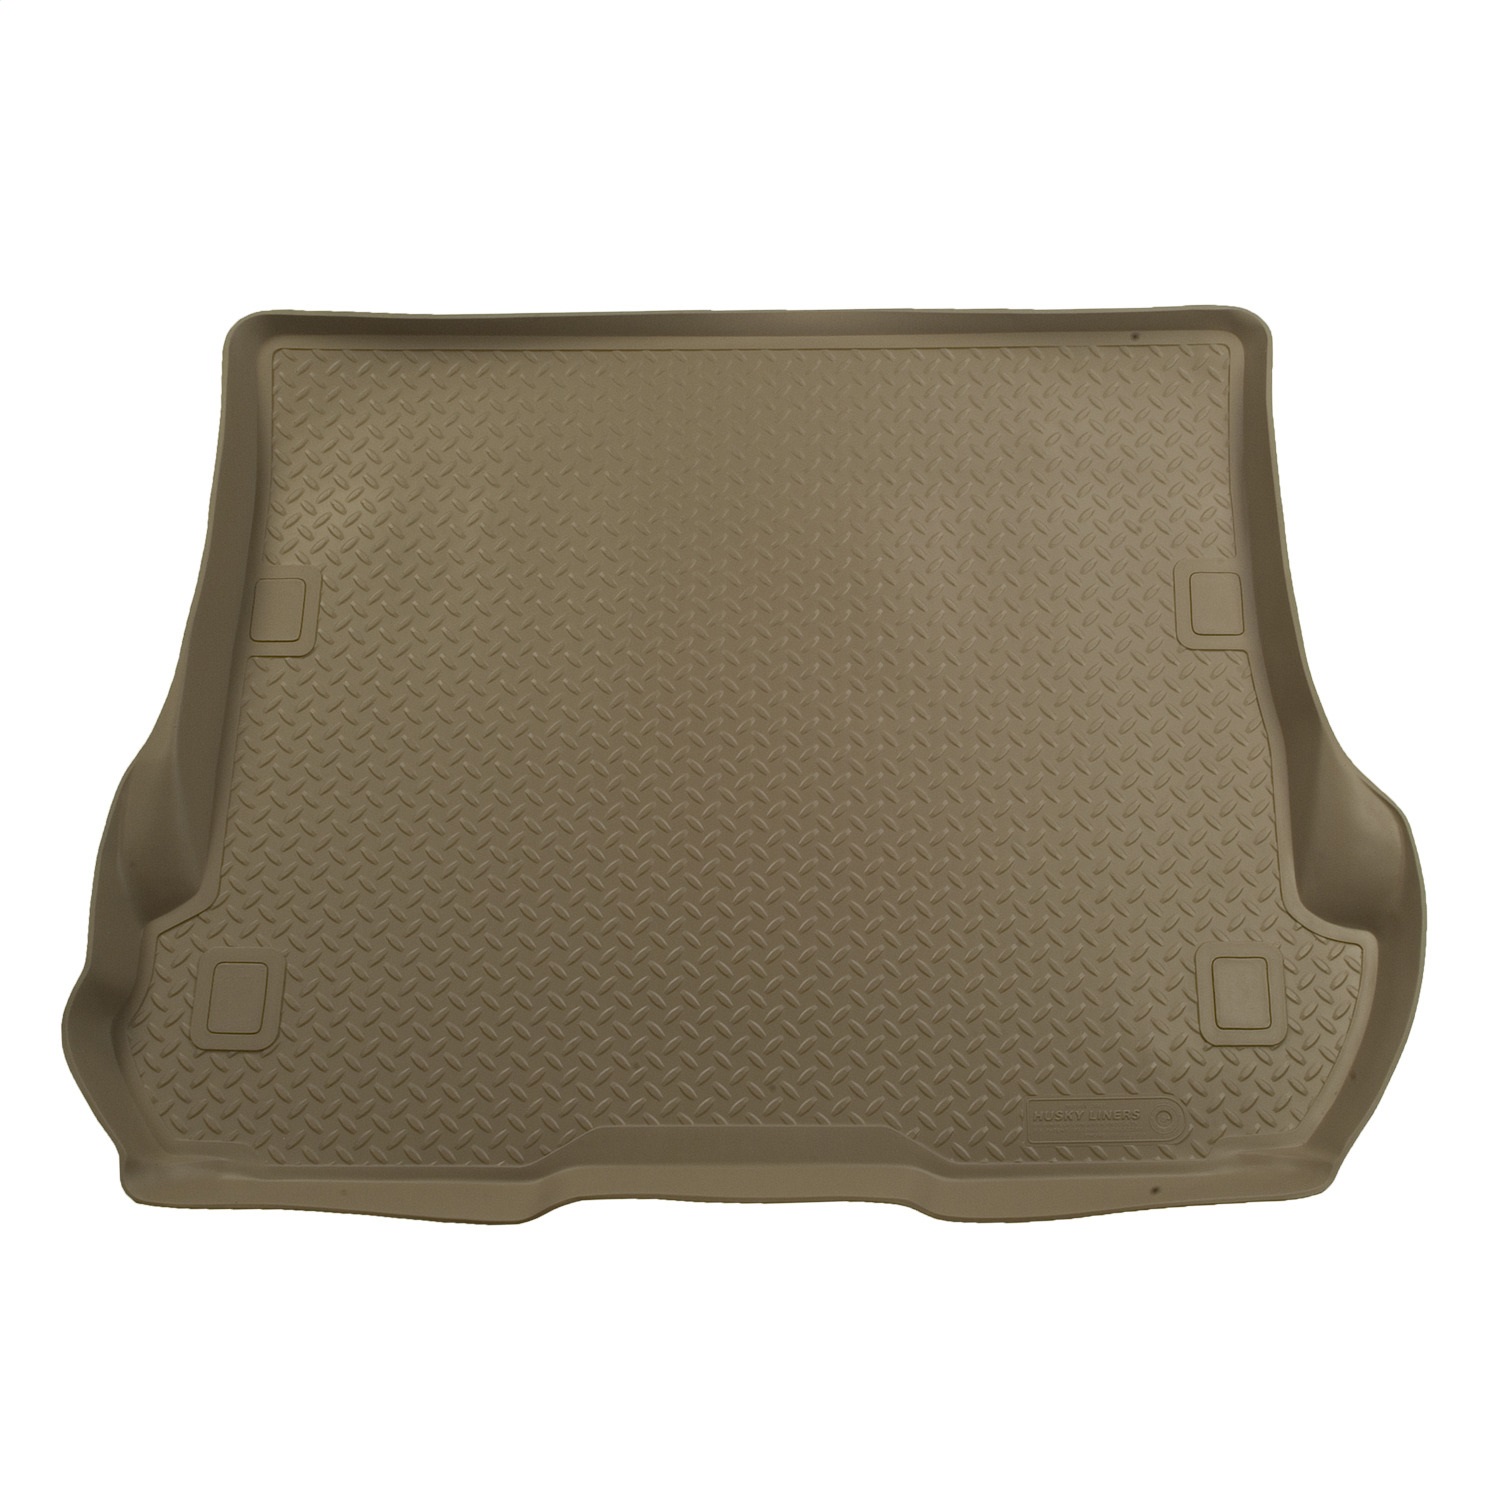 Husky Liners Husky Liners 25553 Classic Style; Cargo Liner Fits 01-06 Sequoia